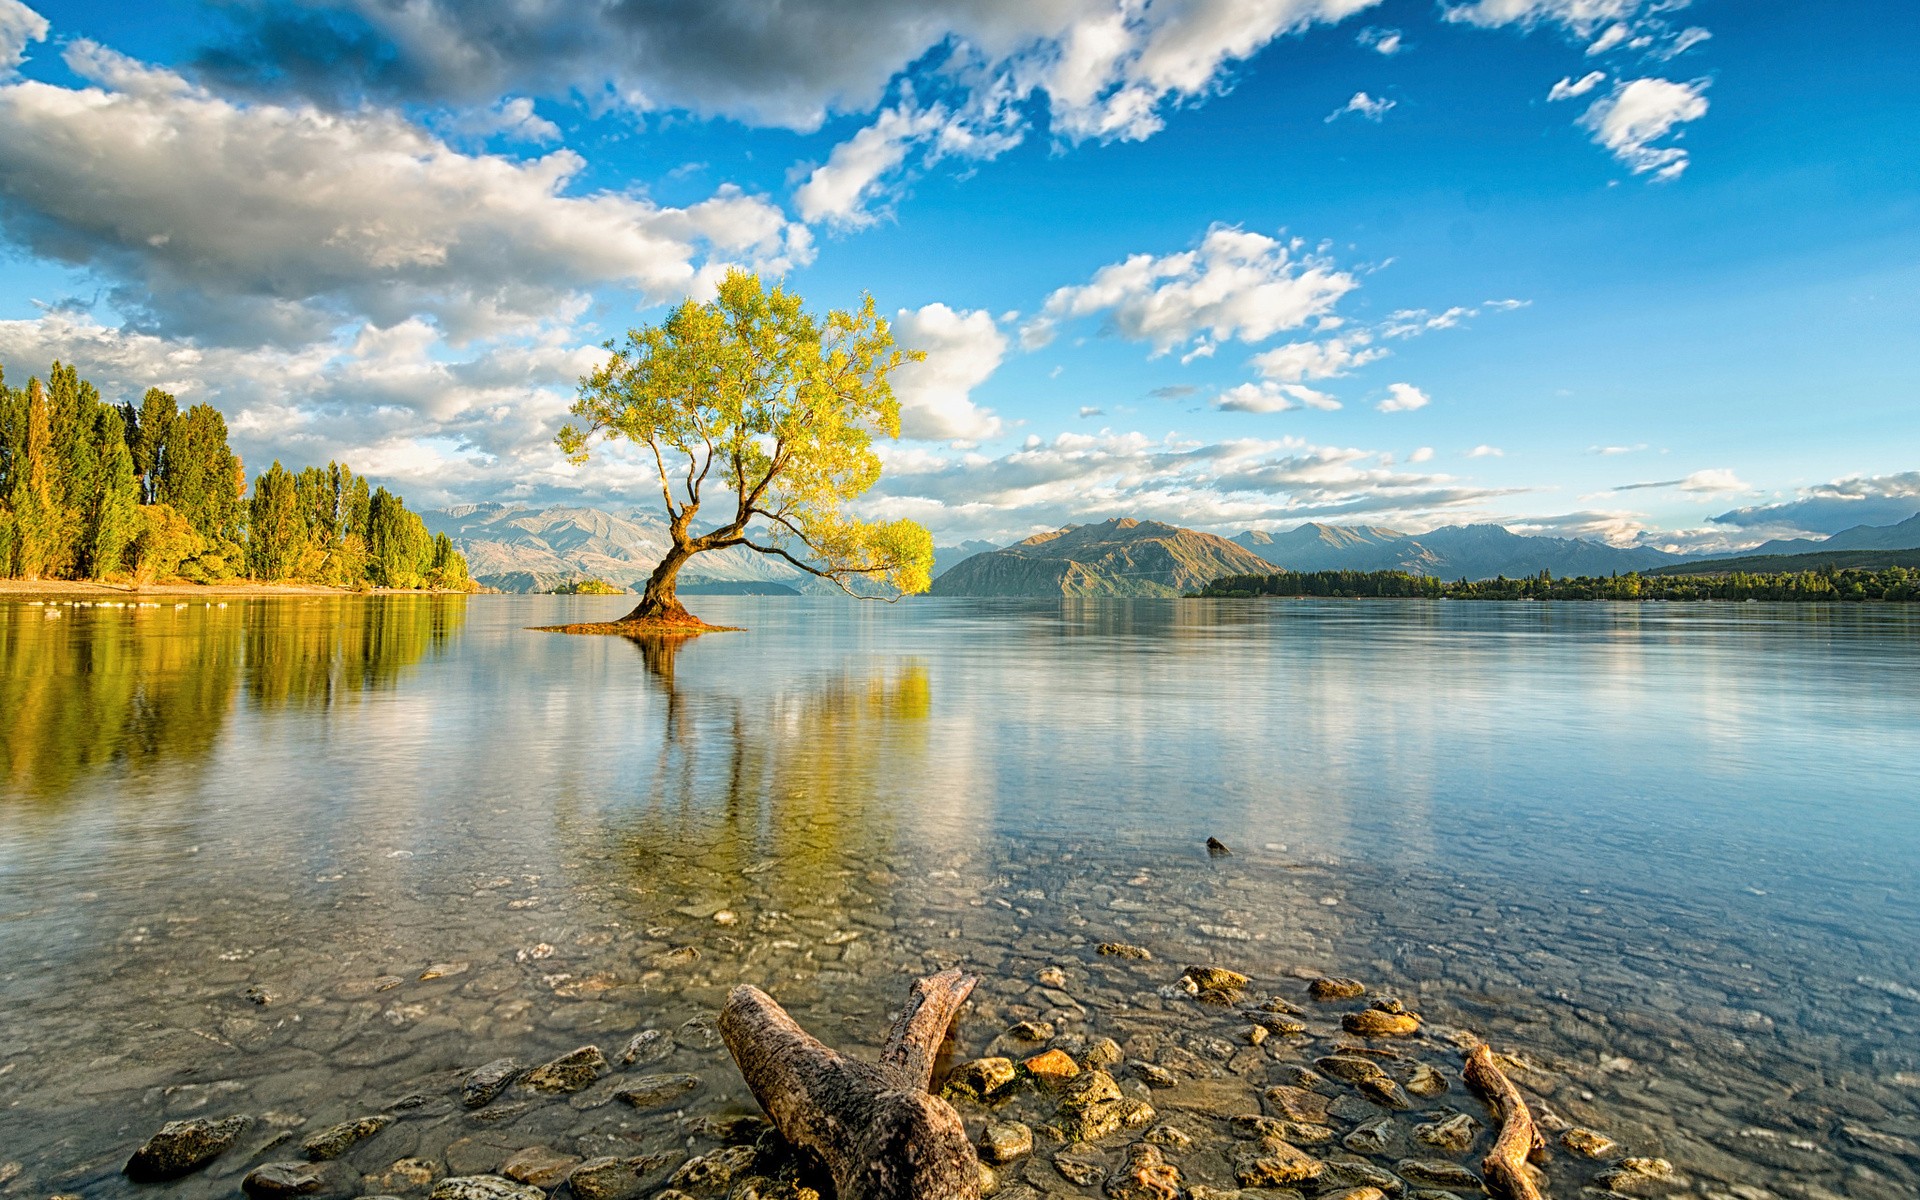 General 1920x1200 nature colorful photography New Zealand Lake Wanaka water trees landscape sky clouds